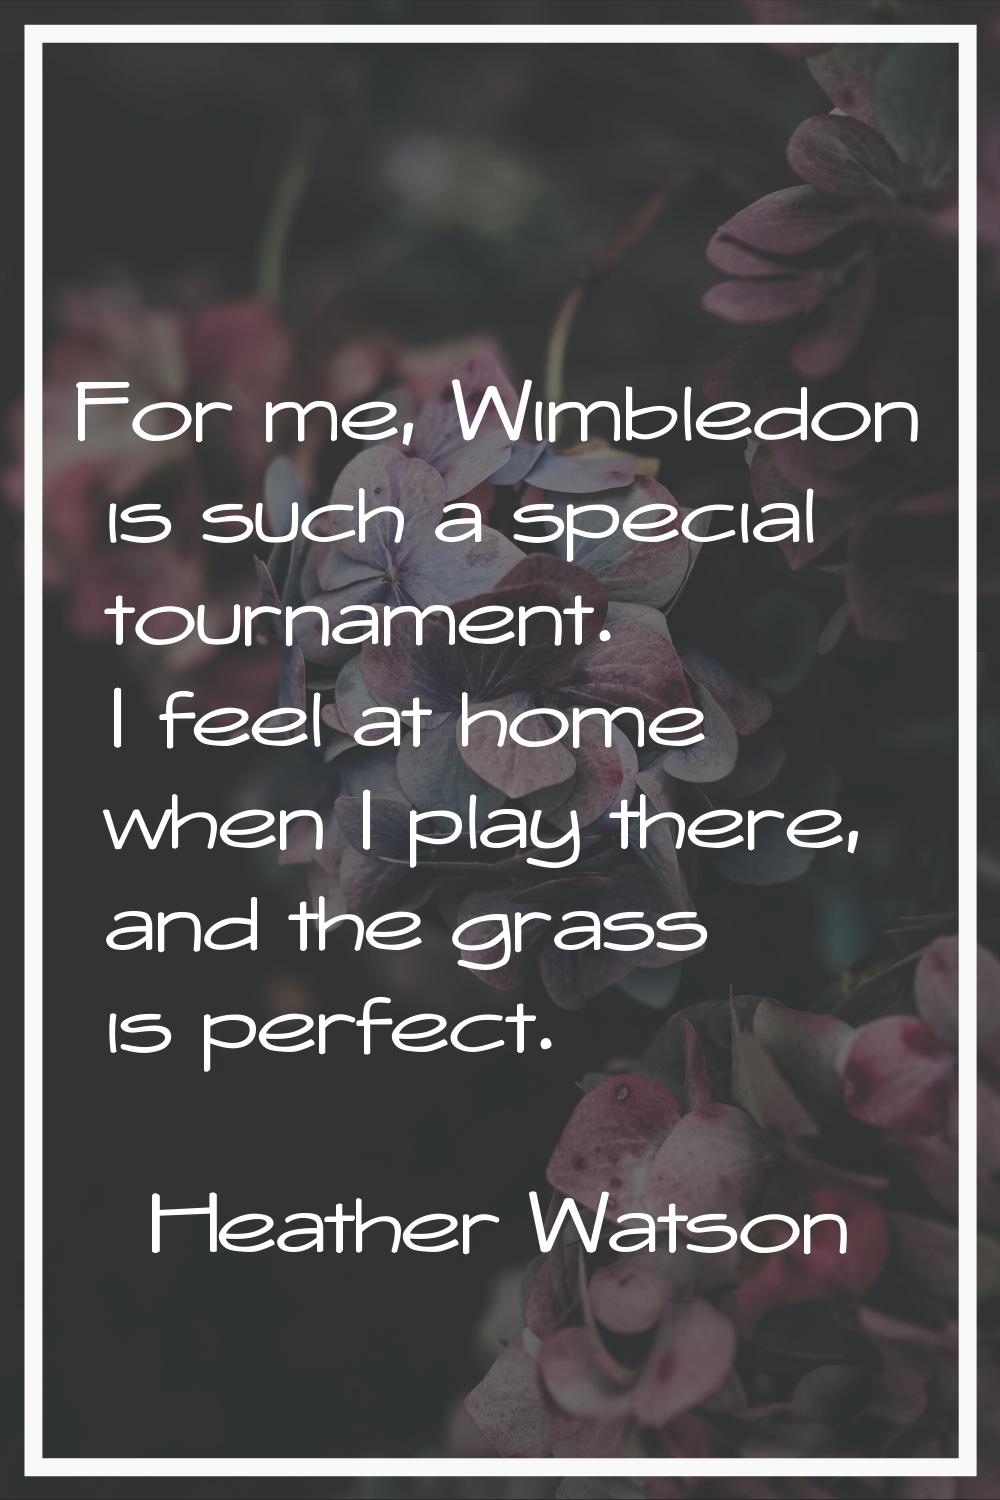 For me, Wimbledon is such a special tournament. I feel at home when I play there, and the grass is 